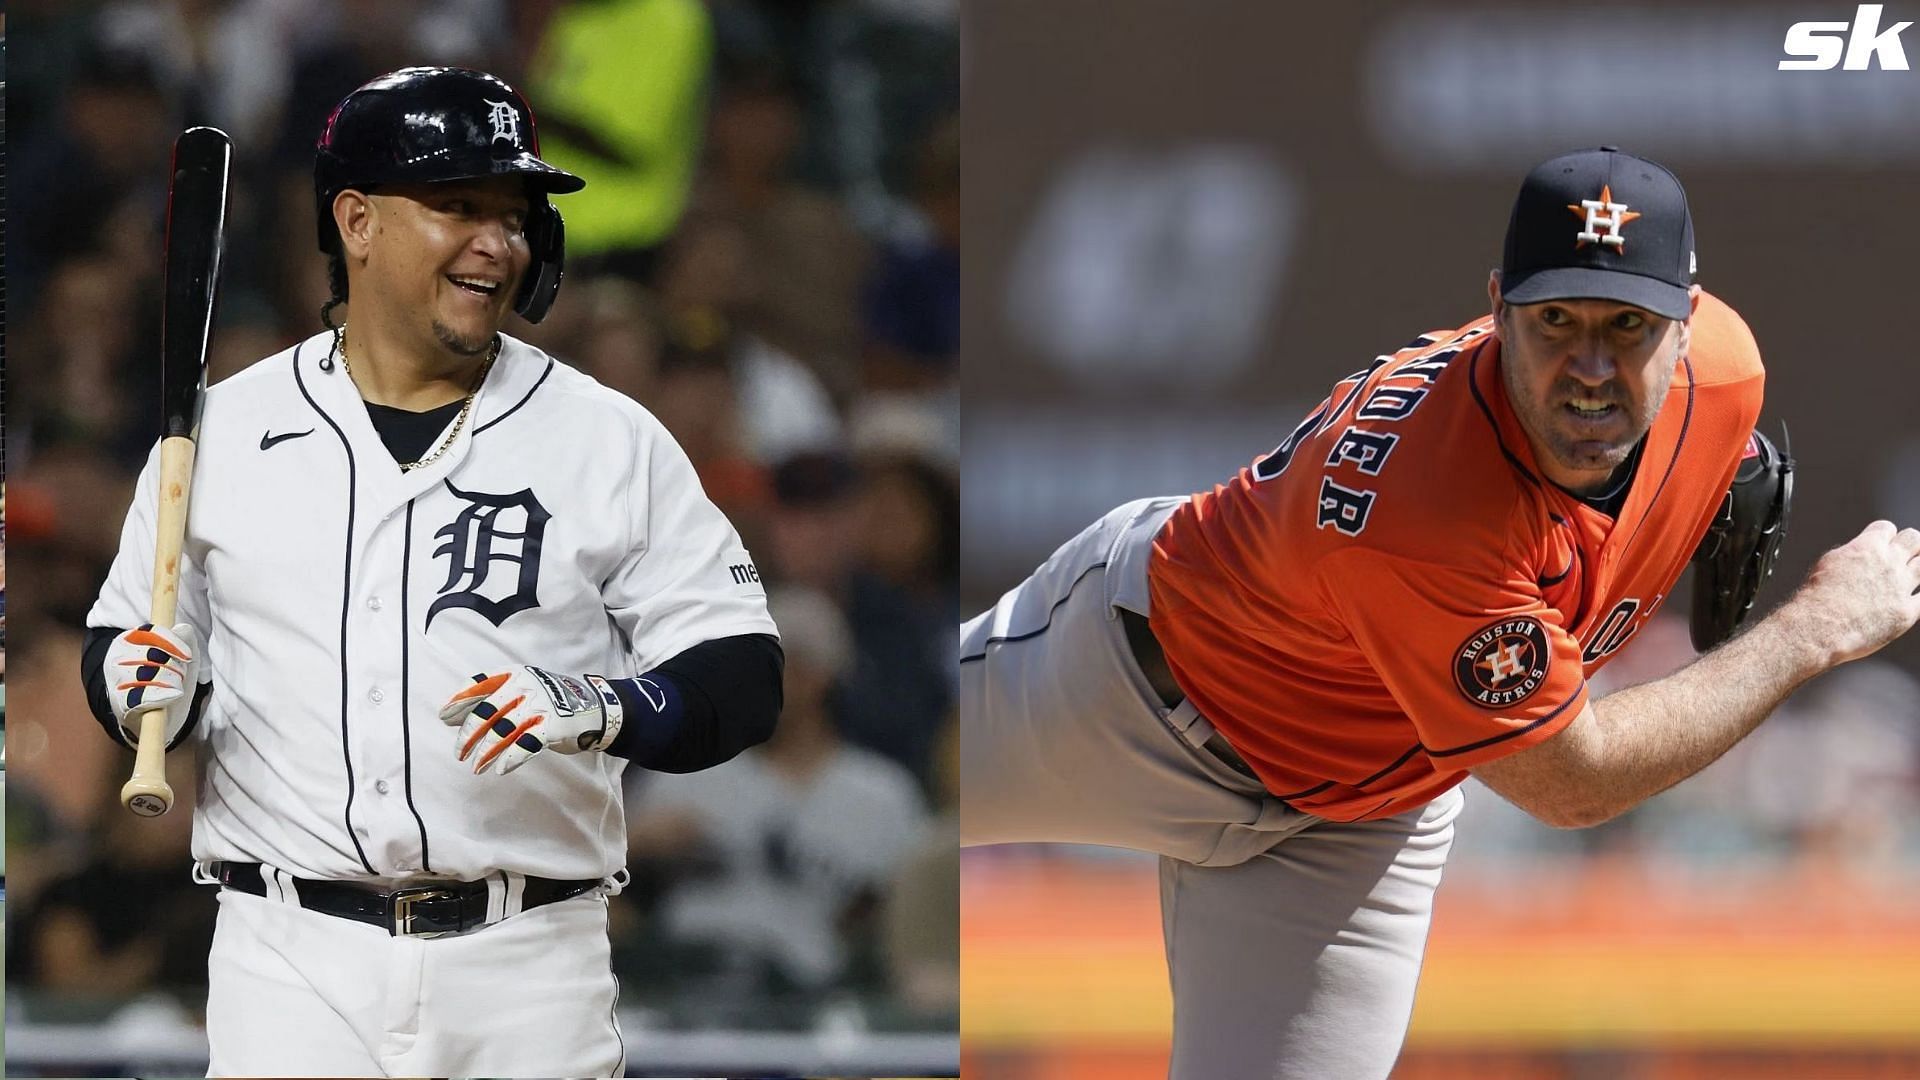 WATCH: Future Hall of Famers Justin Verlander, Miguel Cabrera shared special moment during final showdown